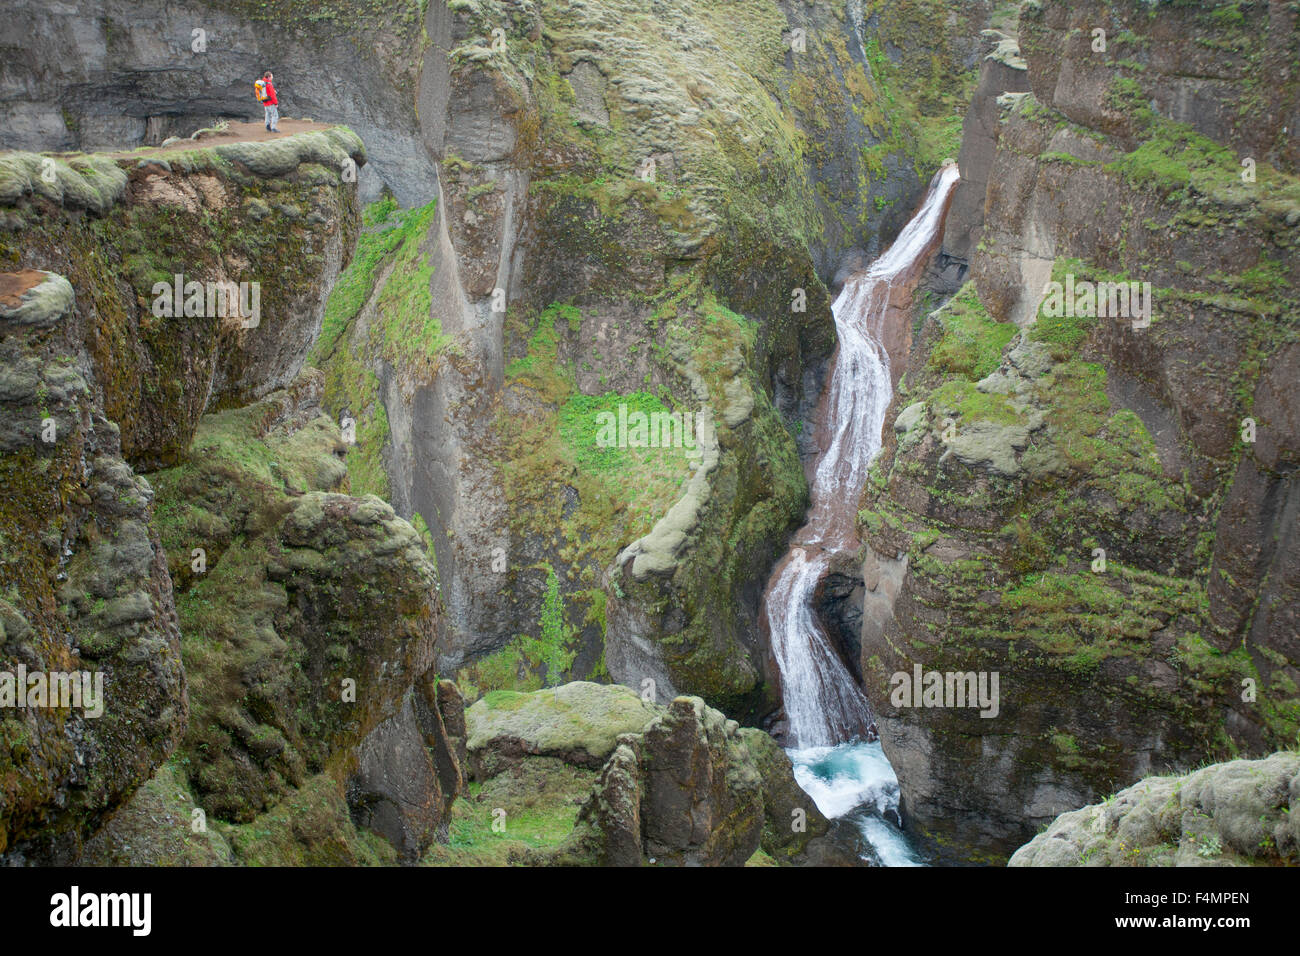 Person dwarfed by a waterfall in the Fjadrargljufur Canyon, Sudhurland, Iceland. Stock Photo